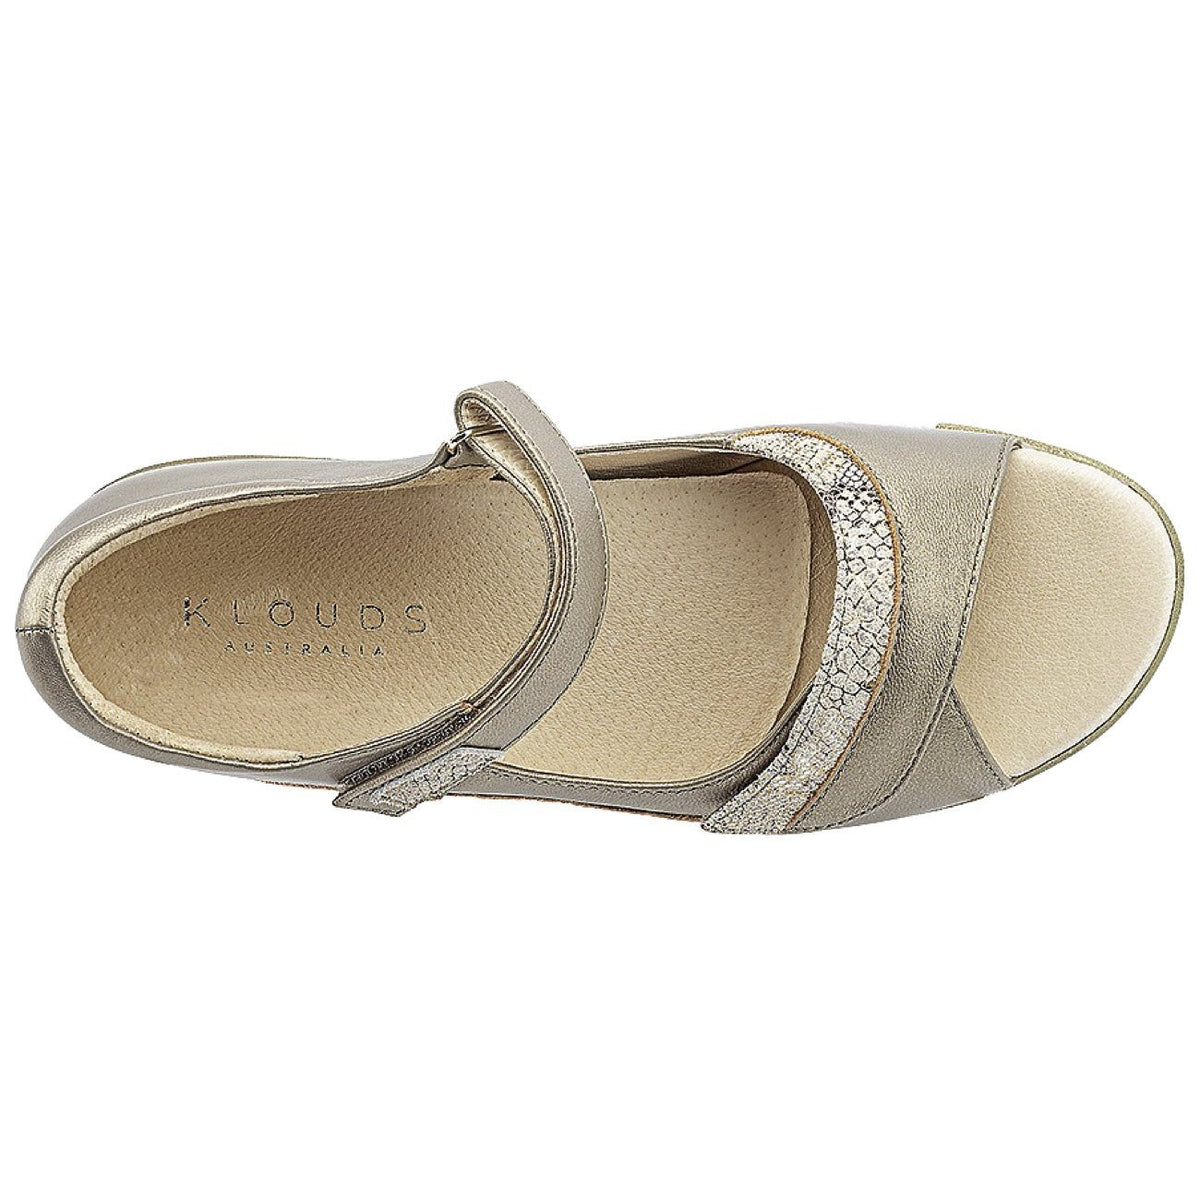 Klouds, Tracy, Sandal, Leather, Champagne Combo Sandals Klouds 